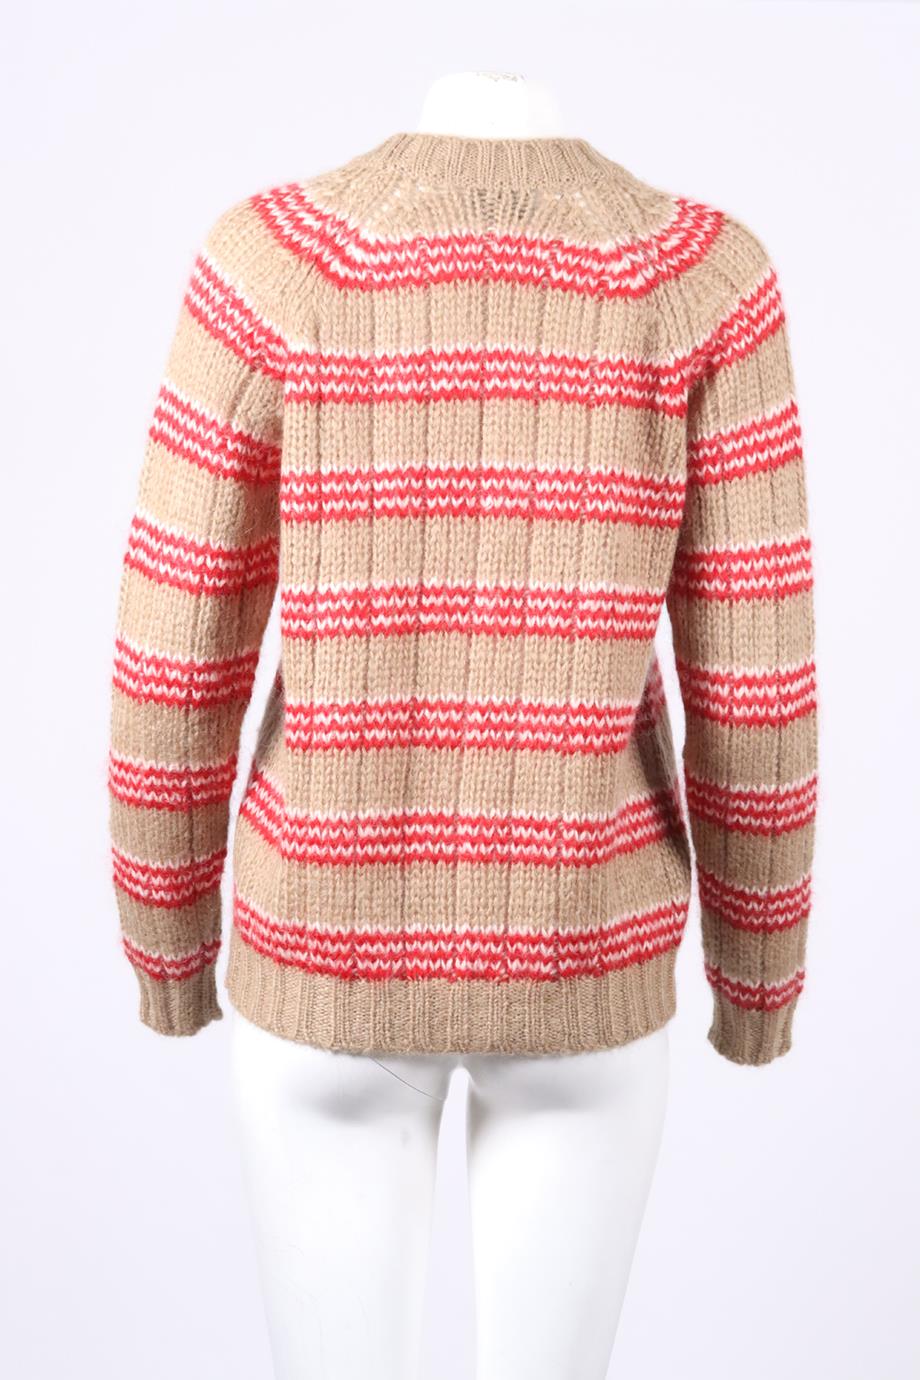 PRADA STRIPED MOHAIR AND WOOL BLEND SWEATER IT 40 UK 8